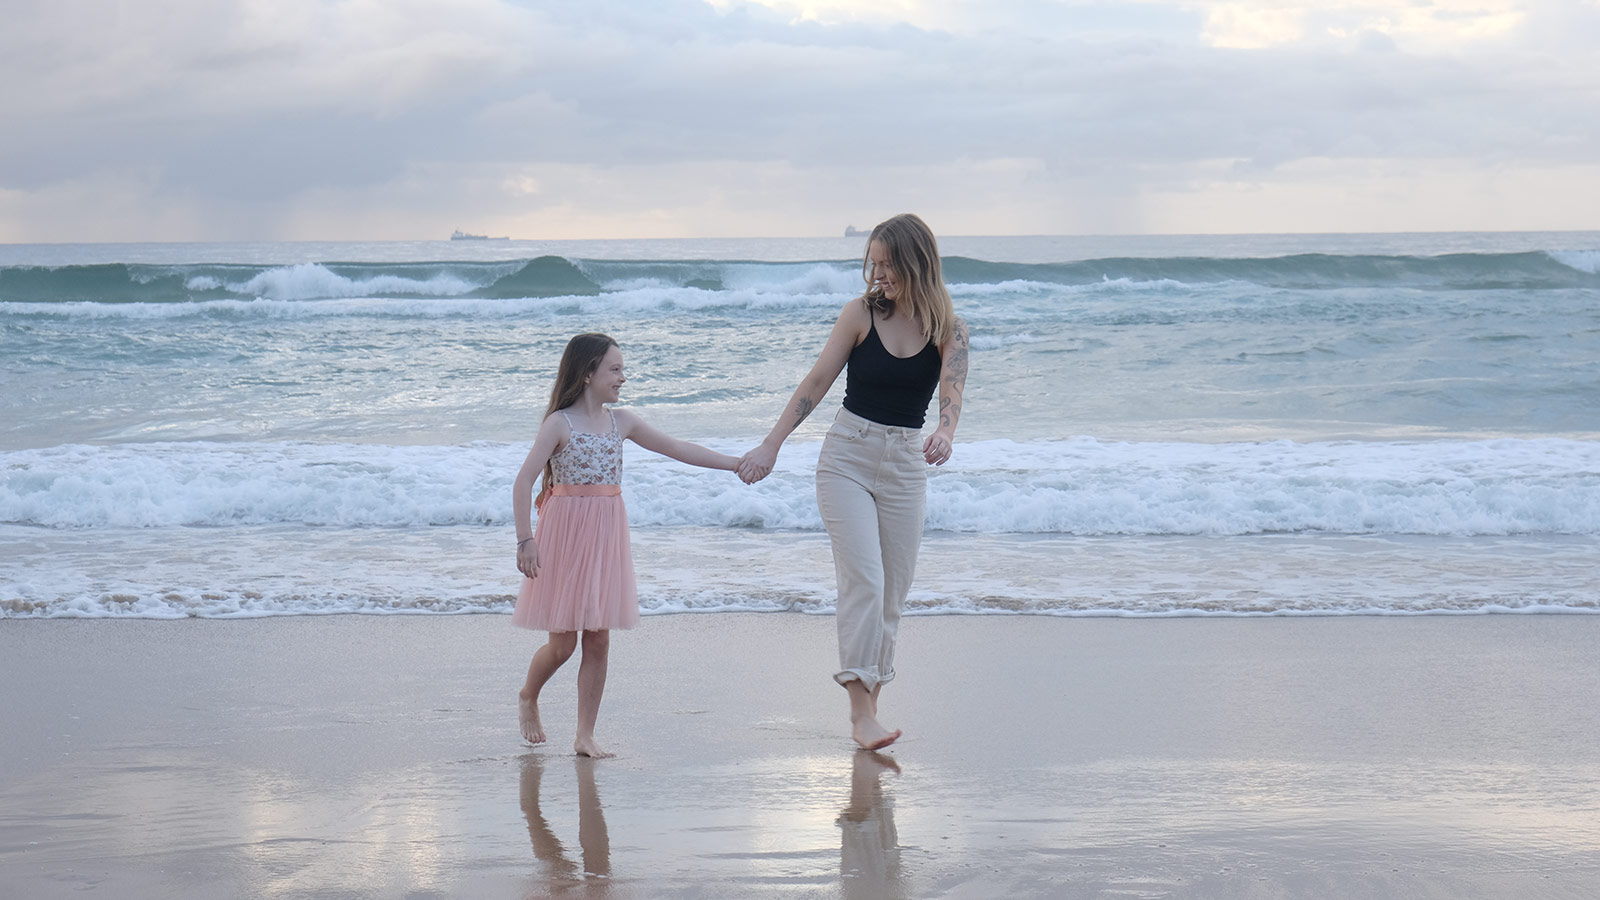 Lara Warwick and her daughter are holding hands on a beach at dusk. They are standing in the shore smiling at each other. Lara is wearing a black top and white pants, her daughter is on her left wearing a pink floral dress.